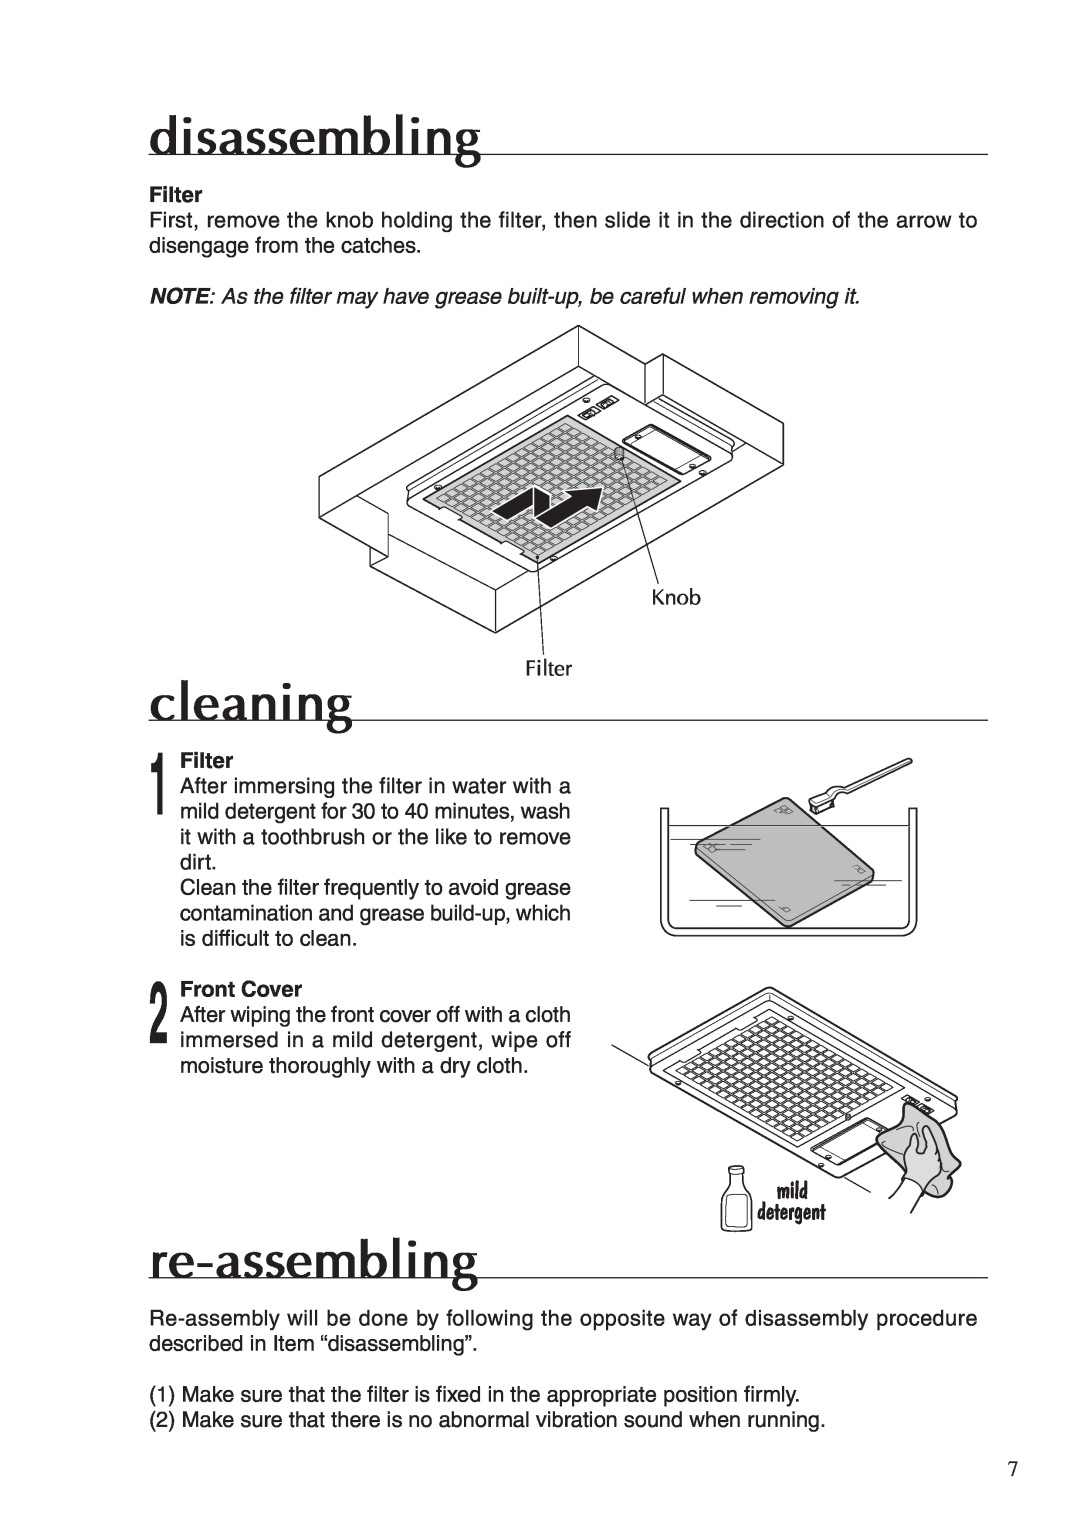 Fujioh BUF-04J operation manual disassembling, cleaning, re-assembling, Filter, Front Cover 